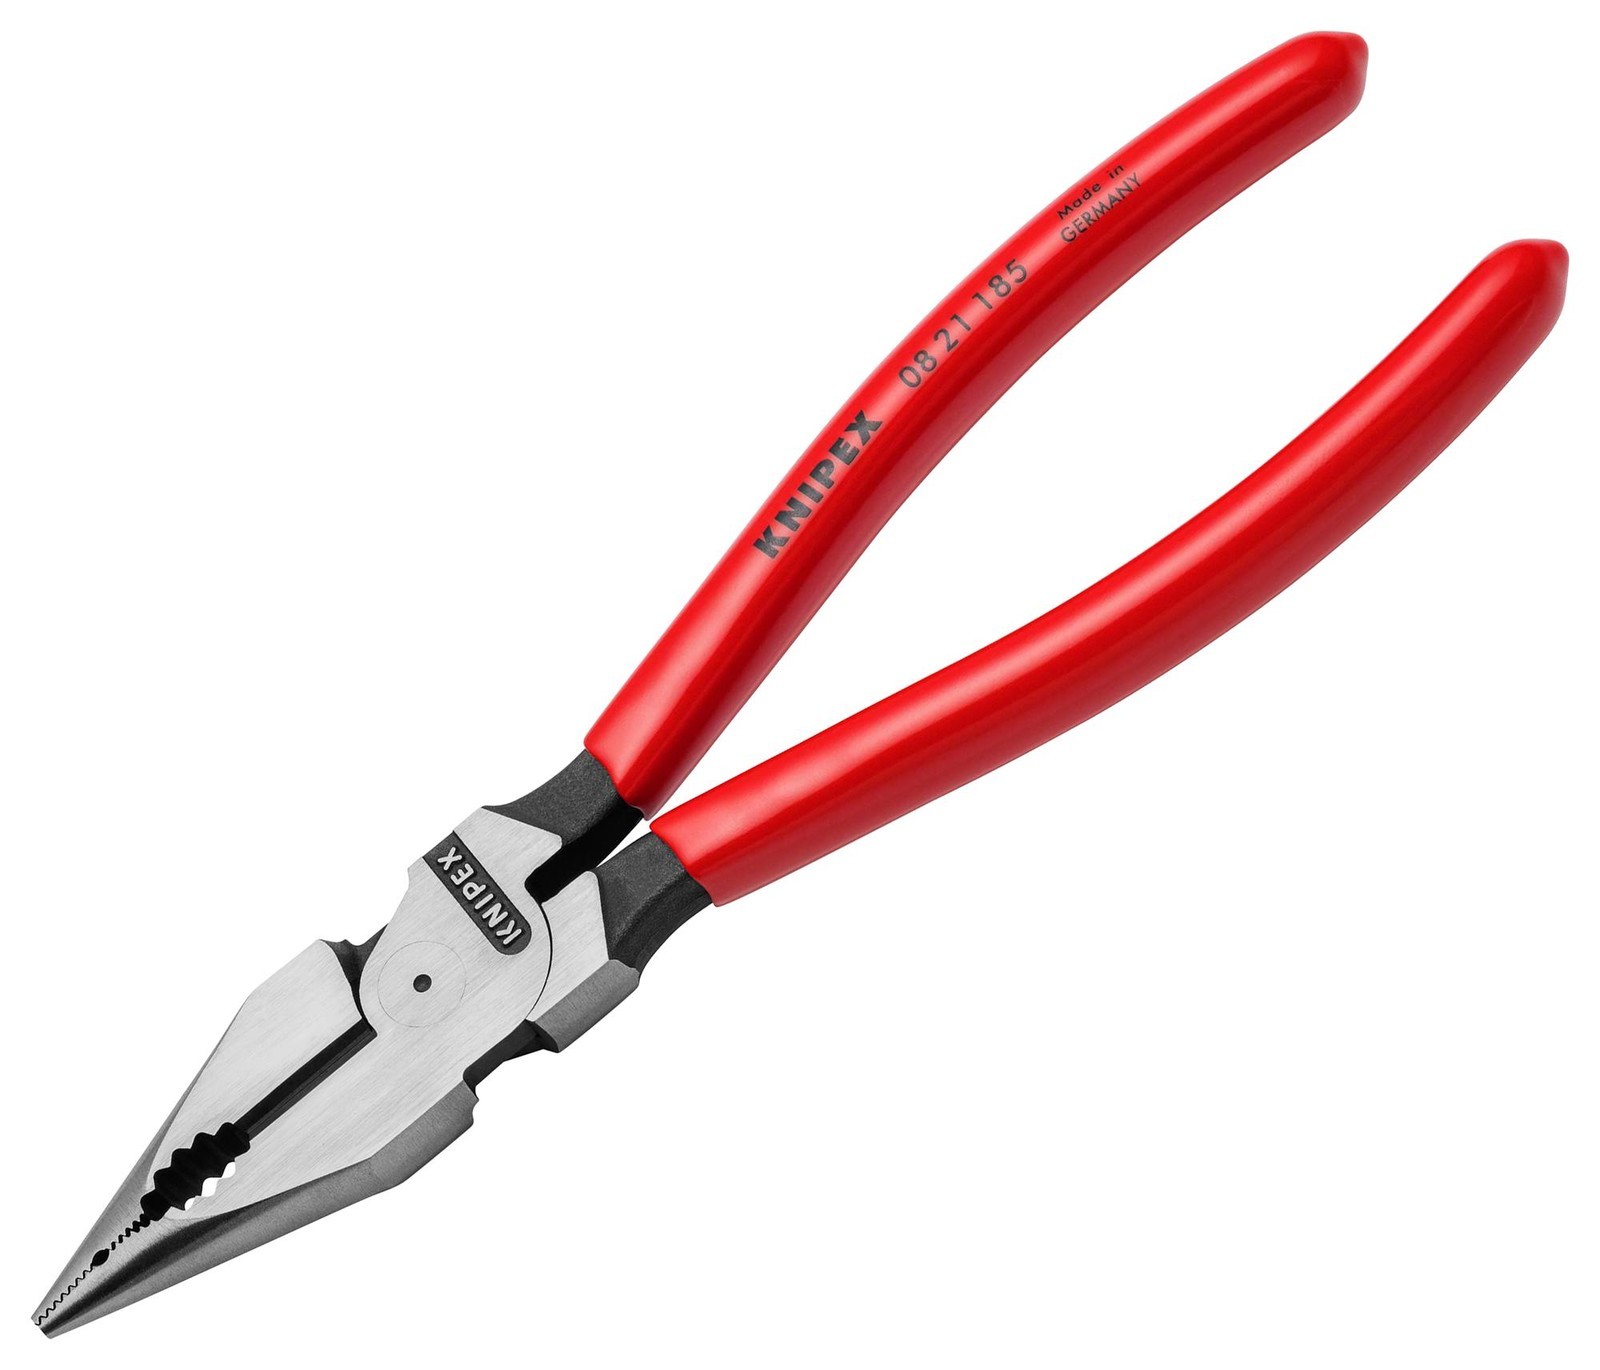 Knipex 08 22 185 Sb Combination Plier, Needle Nose, 185mm